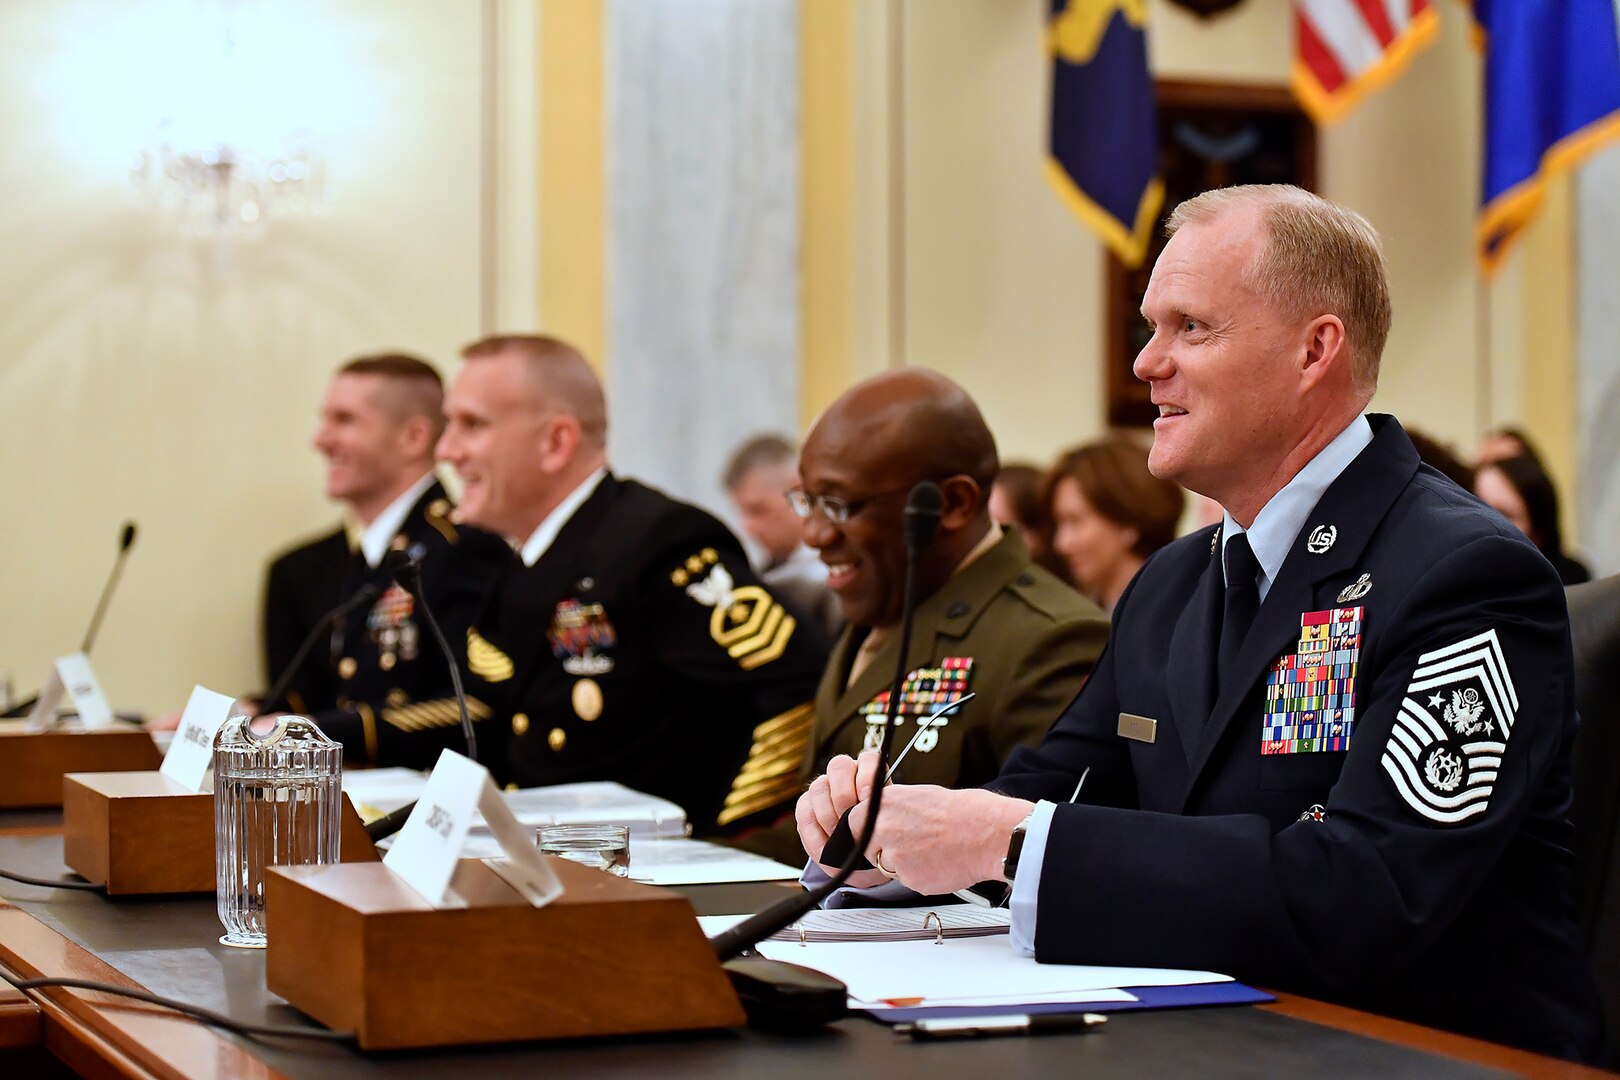 Chief Master Sgt. of the Air Force James A. Cody testifies before the Senate Armed Services Subcommittee on Personnel in Washington, D.C., Feb. 14, 2017. In his comments, Cody talked about compensation and growing the force.  This is the last Congressional hearing for Cody before he retires from the Air Force.  (U.S. Air Force photo/Scott M. Ash)